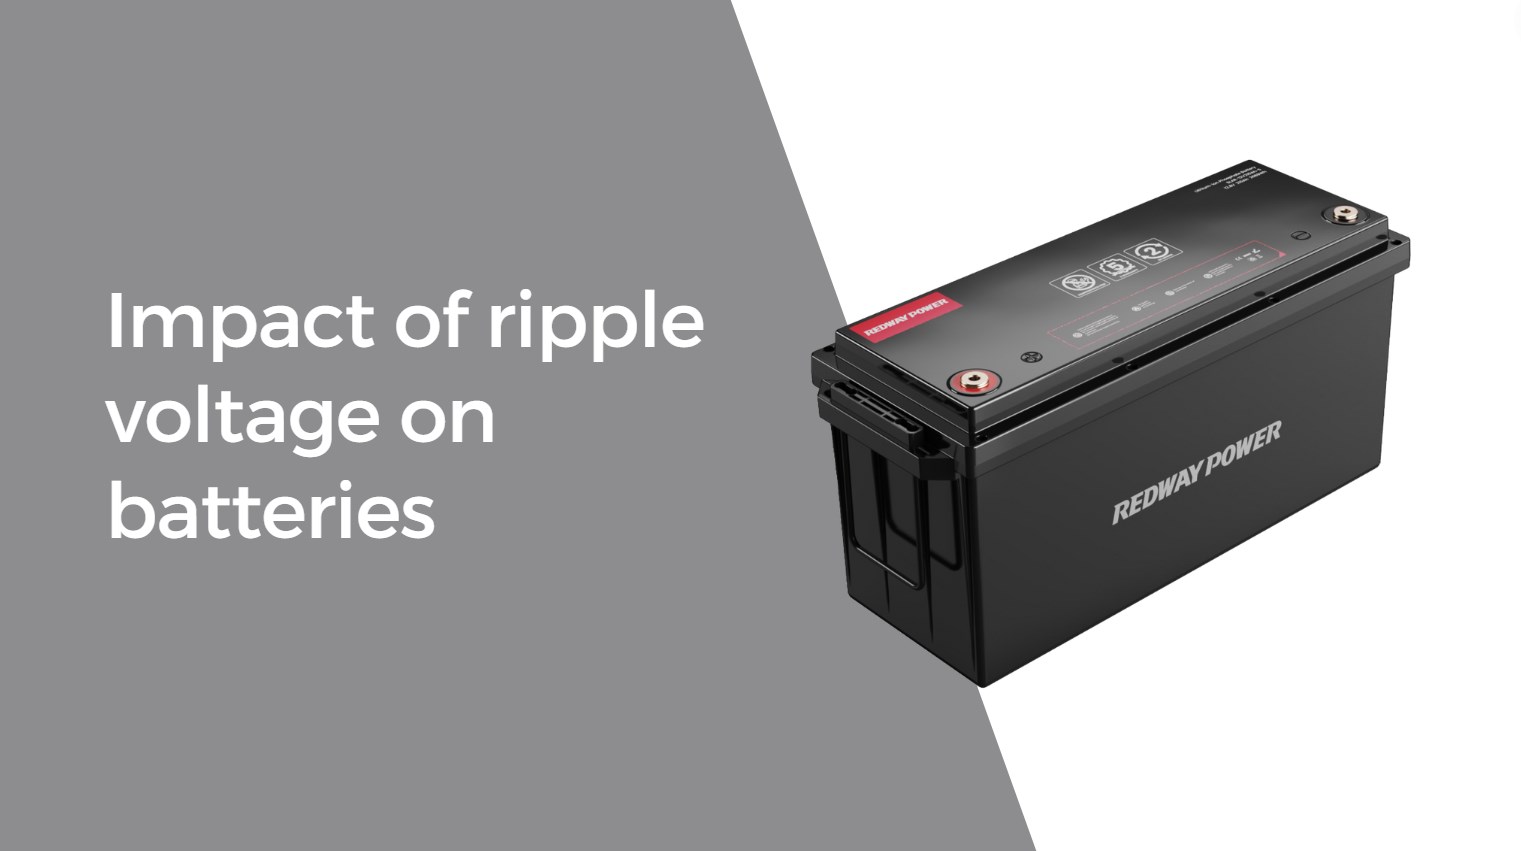 Impact of ripple voltage on batteries. 12v 200ah lifepo4 battery factory redway lfp